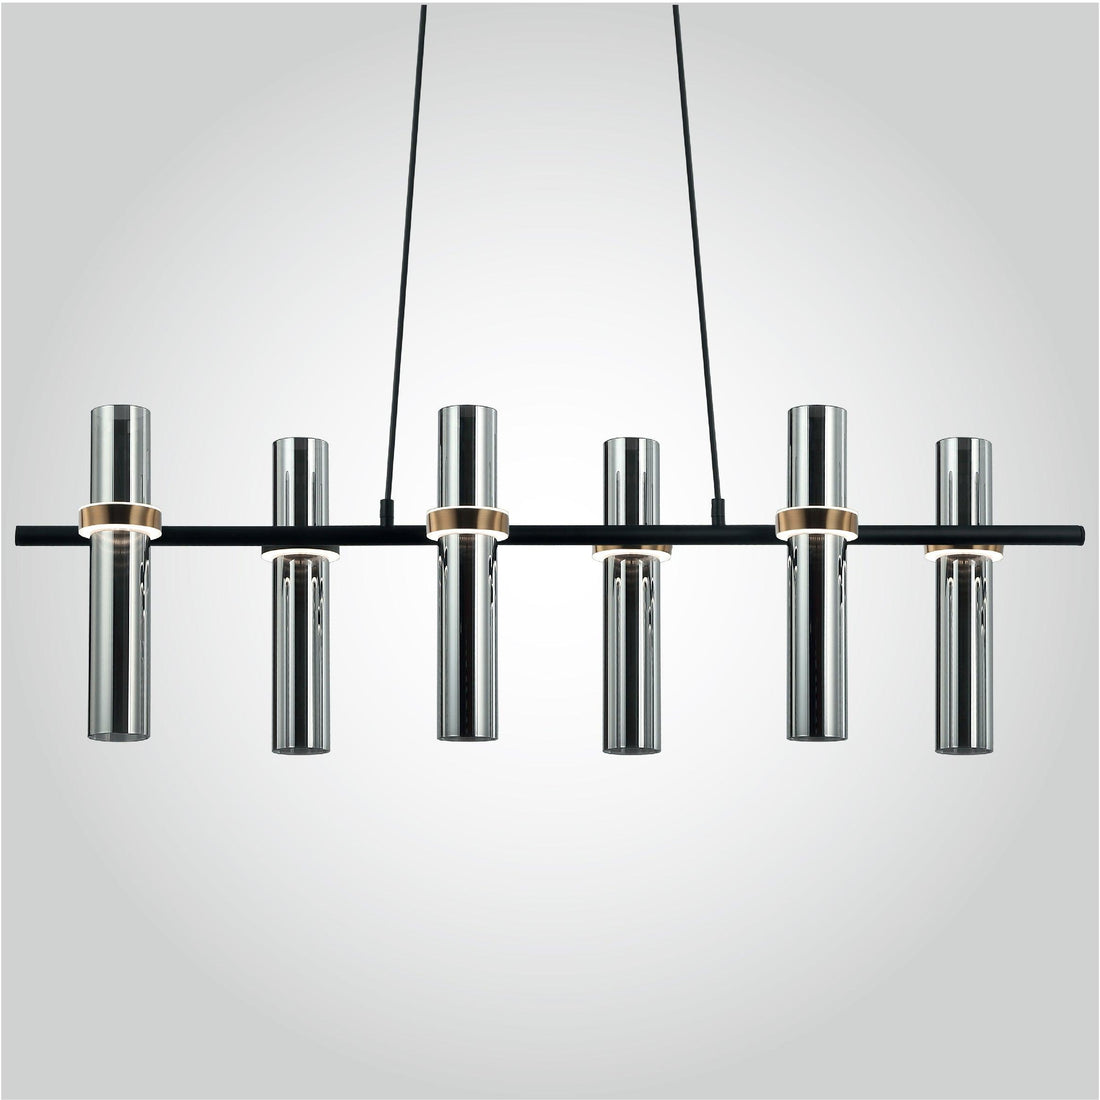 Smokey Cane 6 Linear Pendant Light by The Light Library